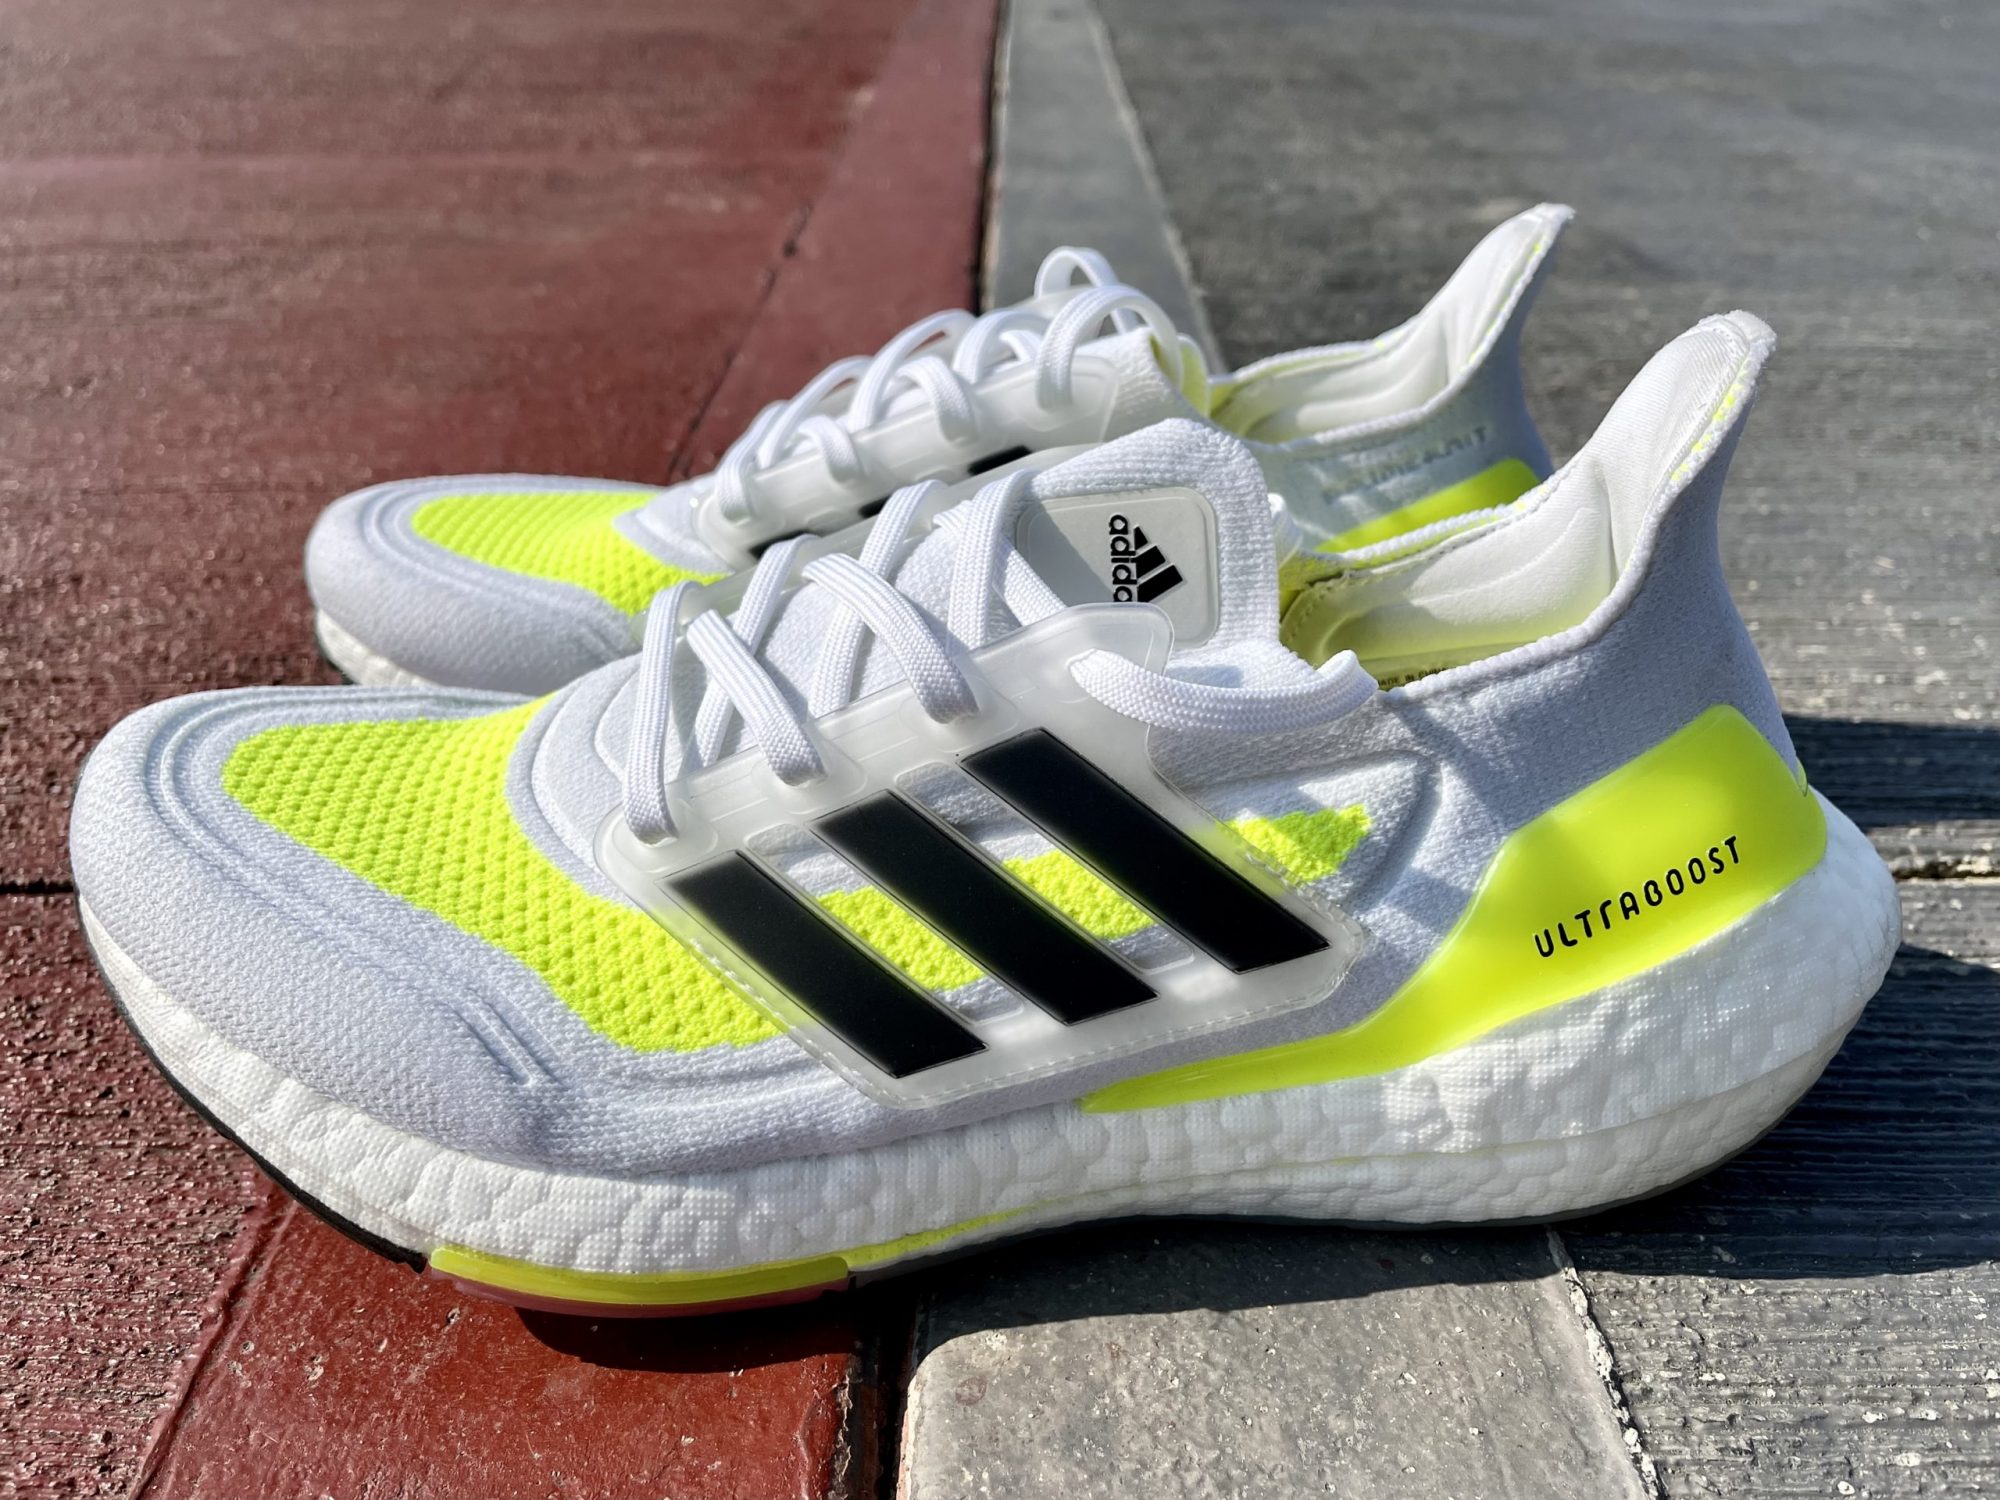 Adidas Ultraboost 21 Review: Hands-On Features - ArenaMalaysia.Asia